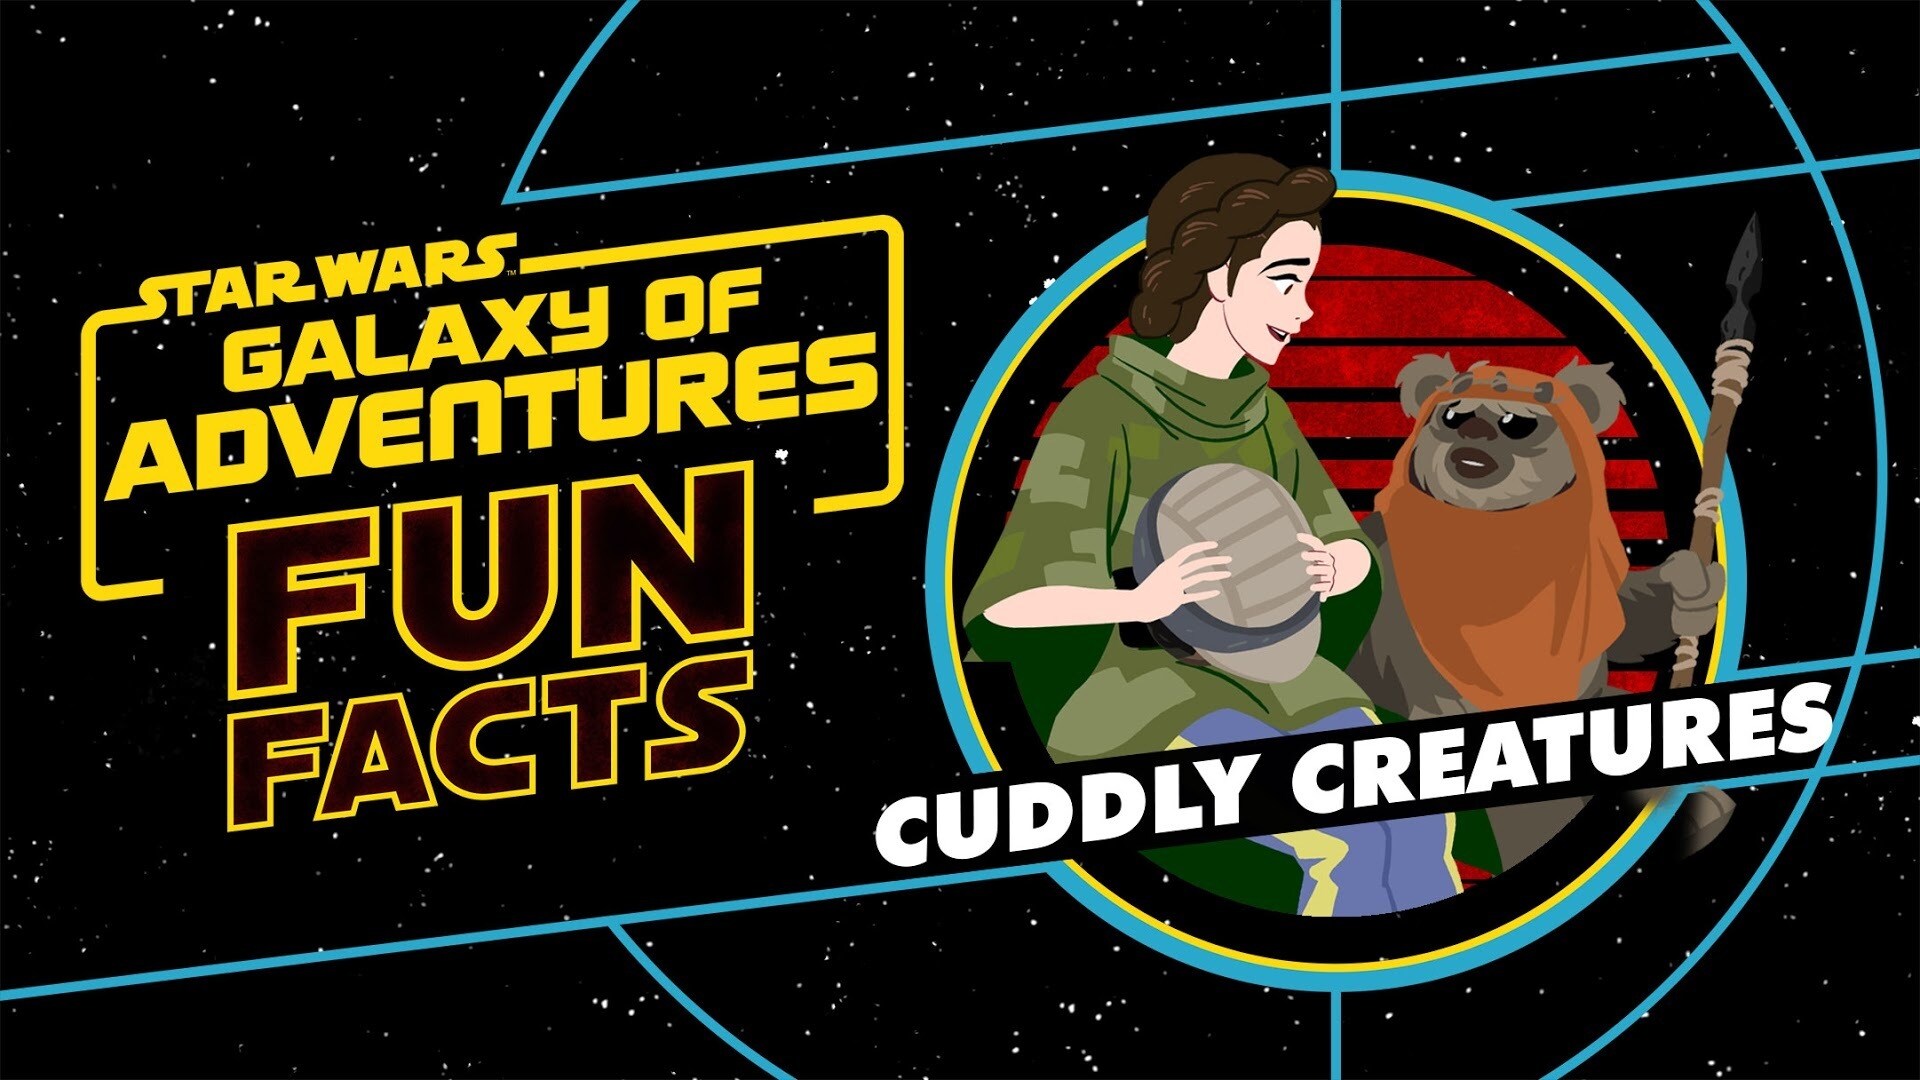 Cuddly Creatures | Star Wars Galaxy of Adventures Fun Facts